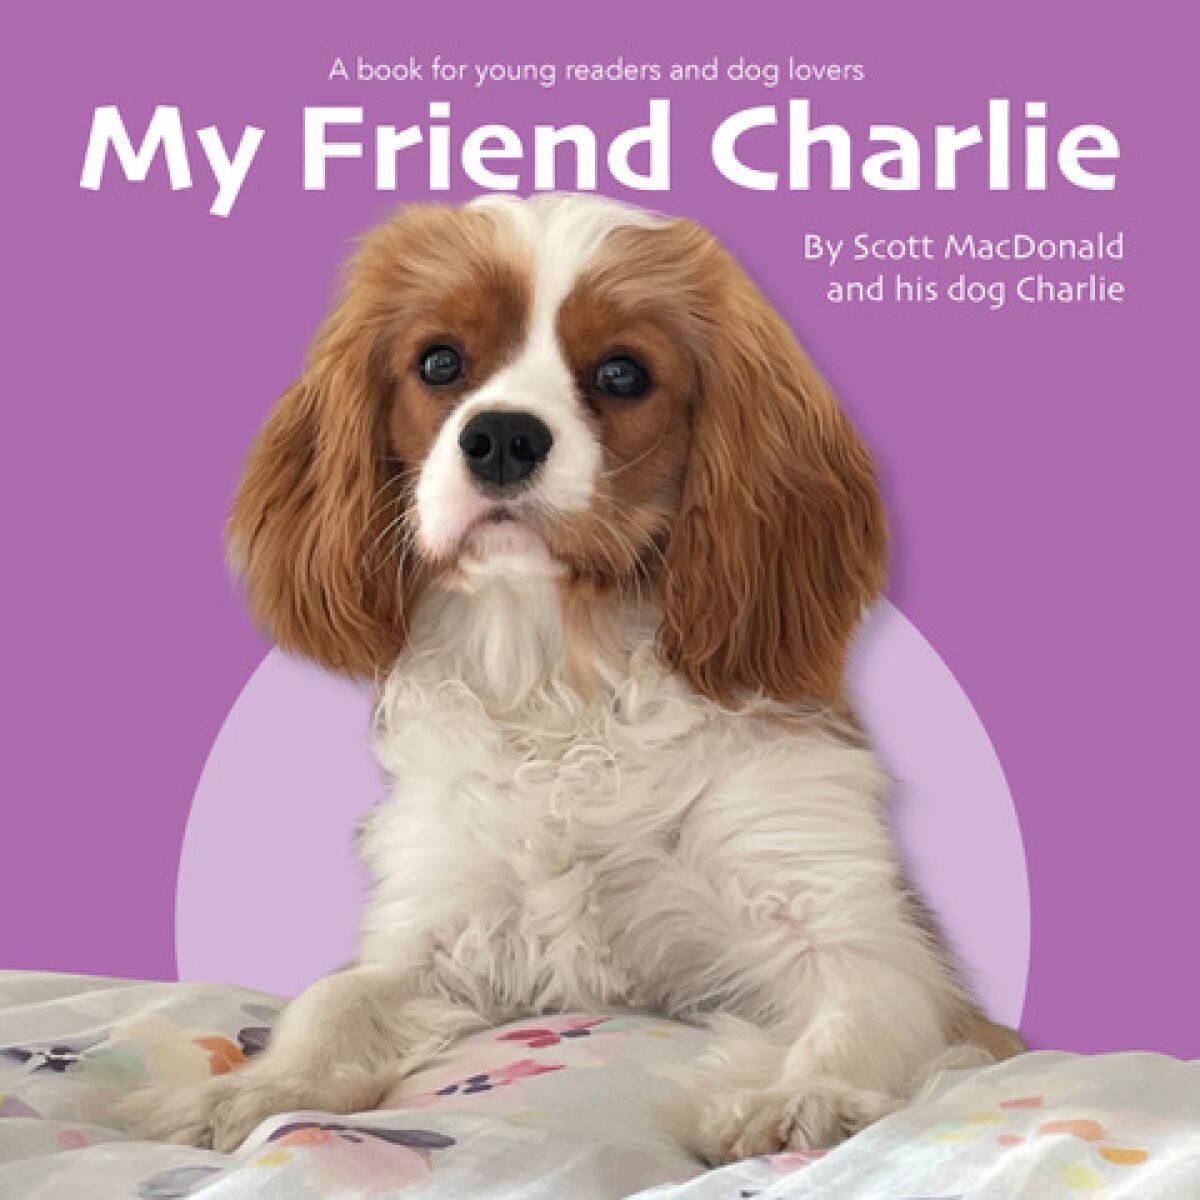 "My Friend Charlie" is the first children's book by San Diego author Scott MacDonald.